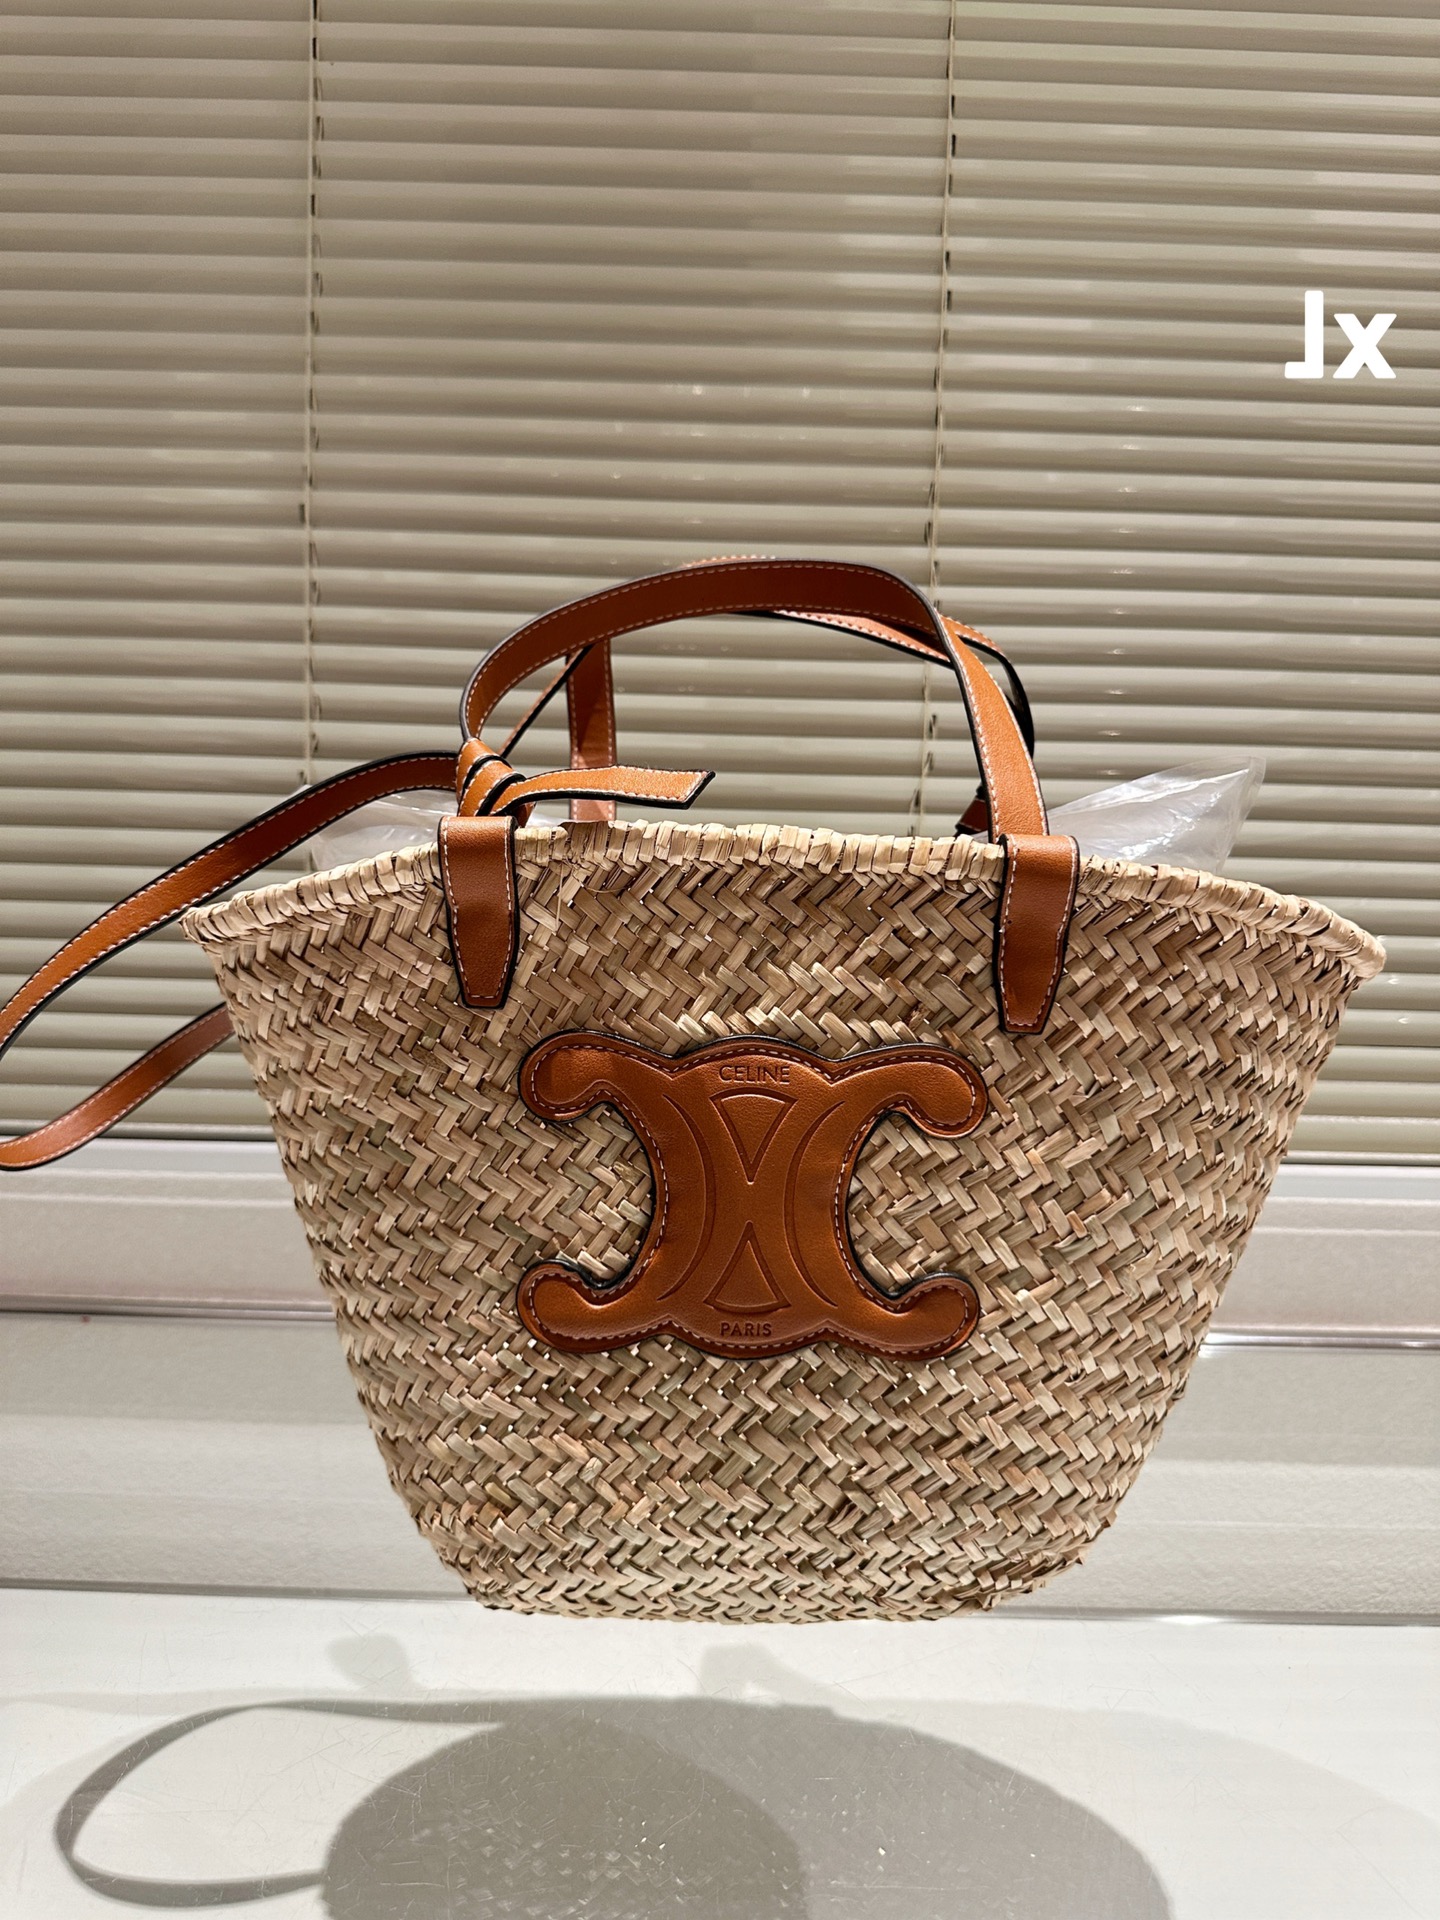 Celine Handbags Tote Bags Weave Straw Woven Summer Collection Beach